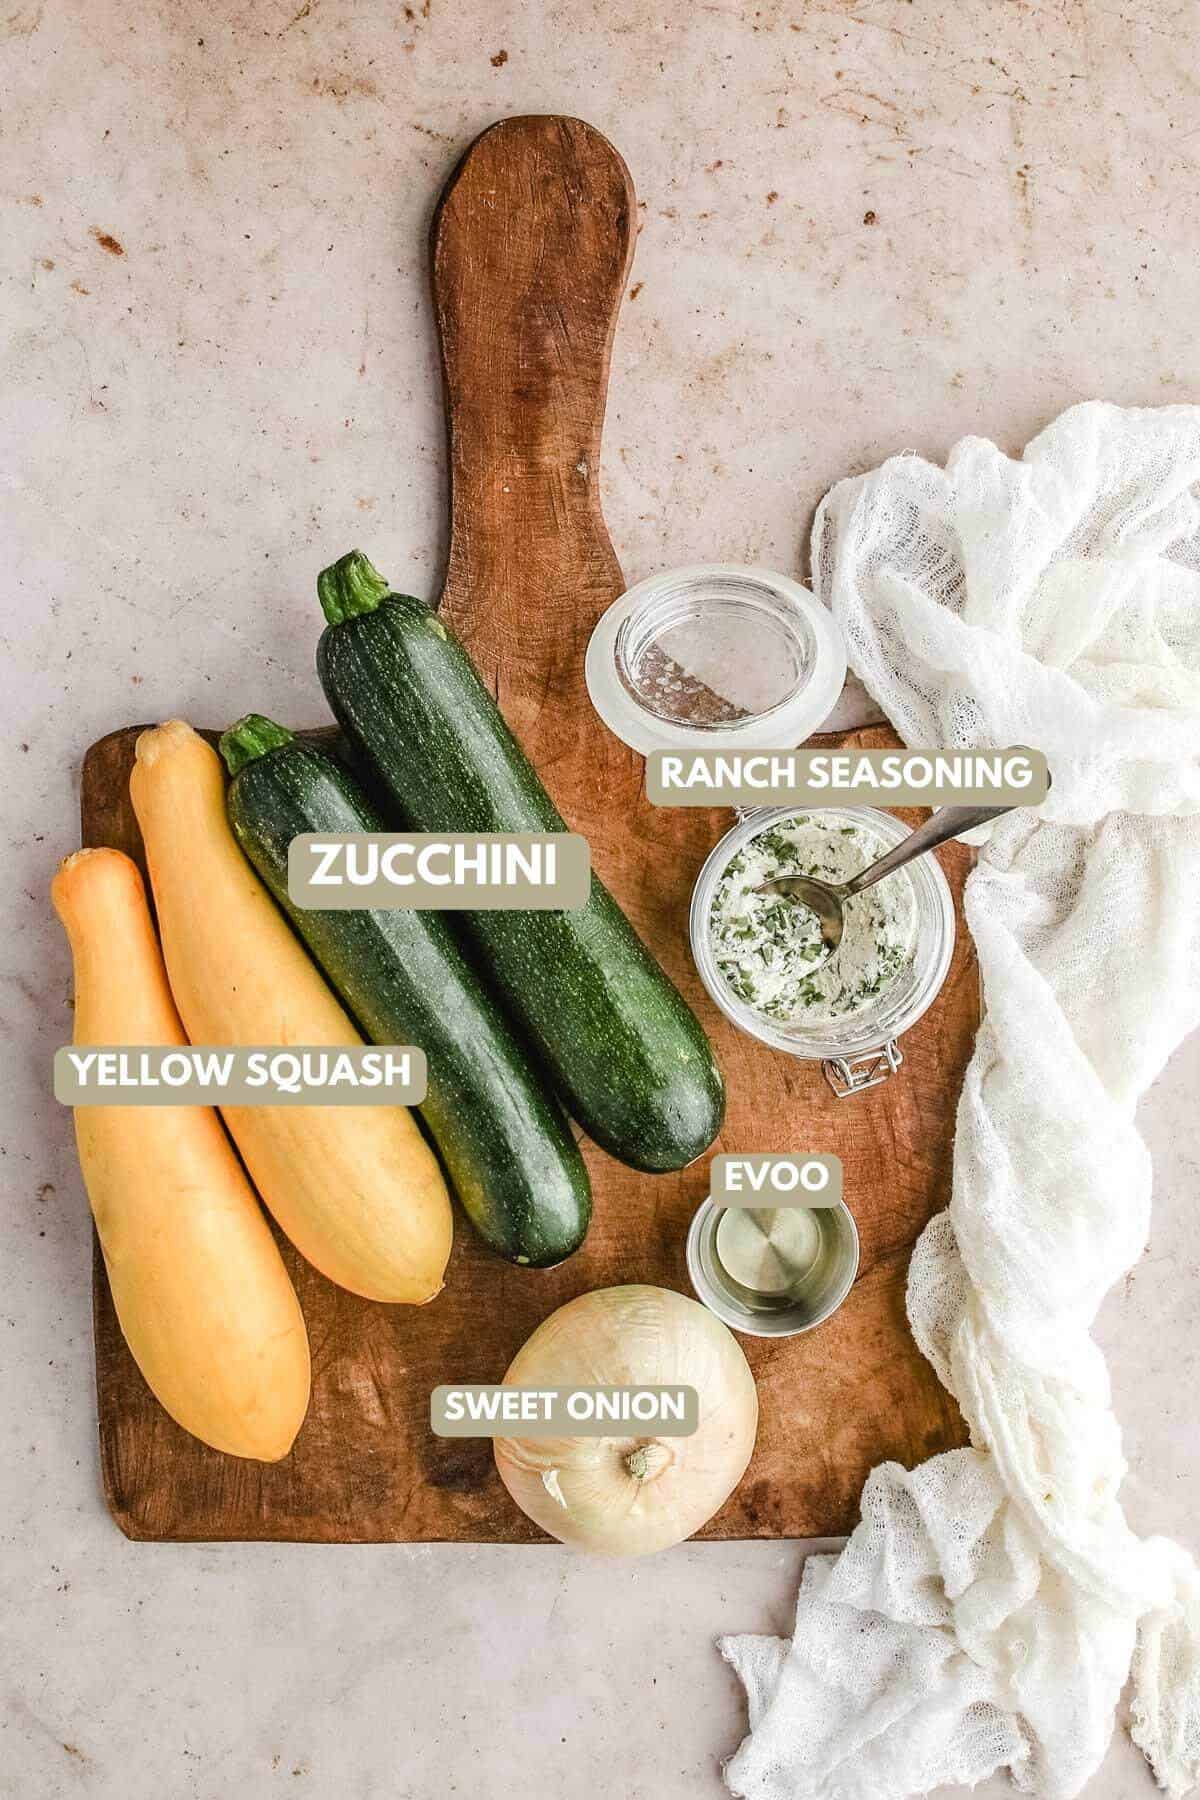 labeled ingredients for this recipe